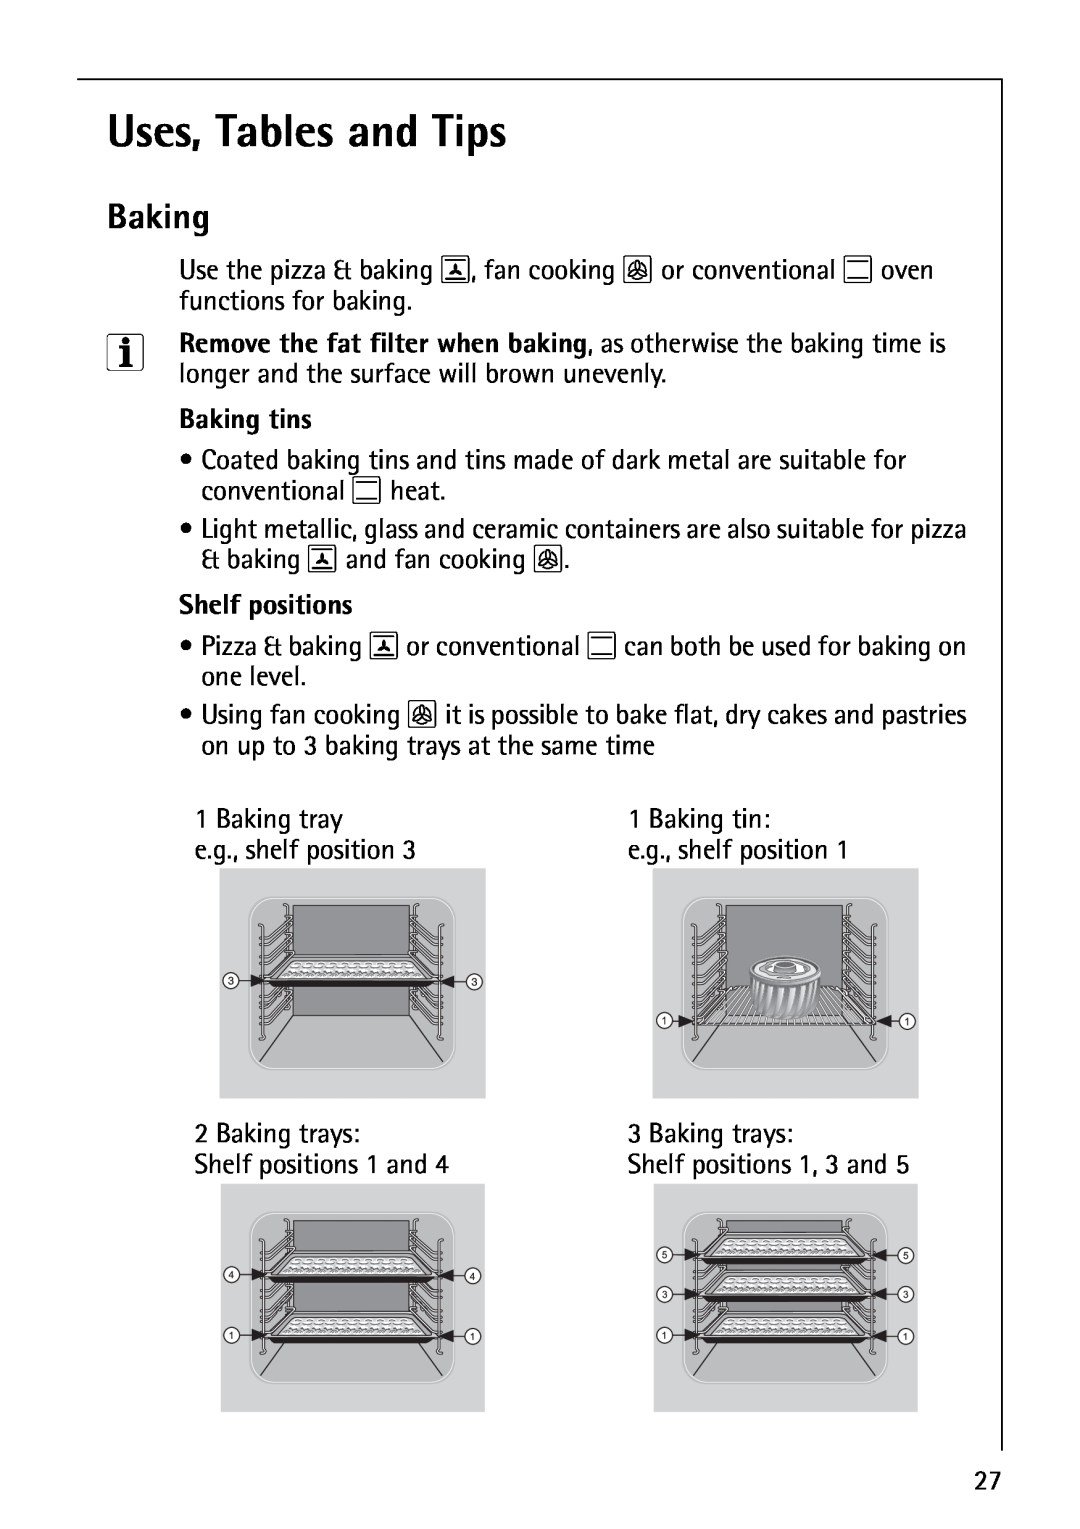 AEG B4130-1 operating instructions Uses, Tables and Tips, Baking tins, Shelf positions 